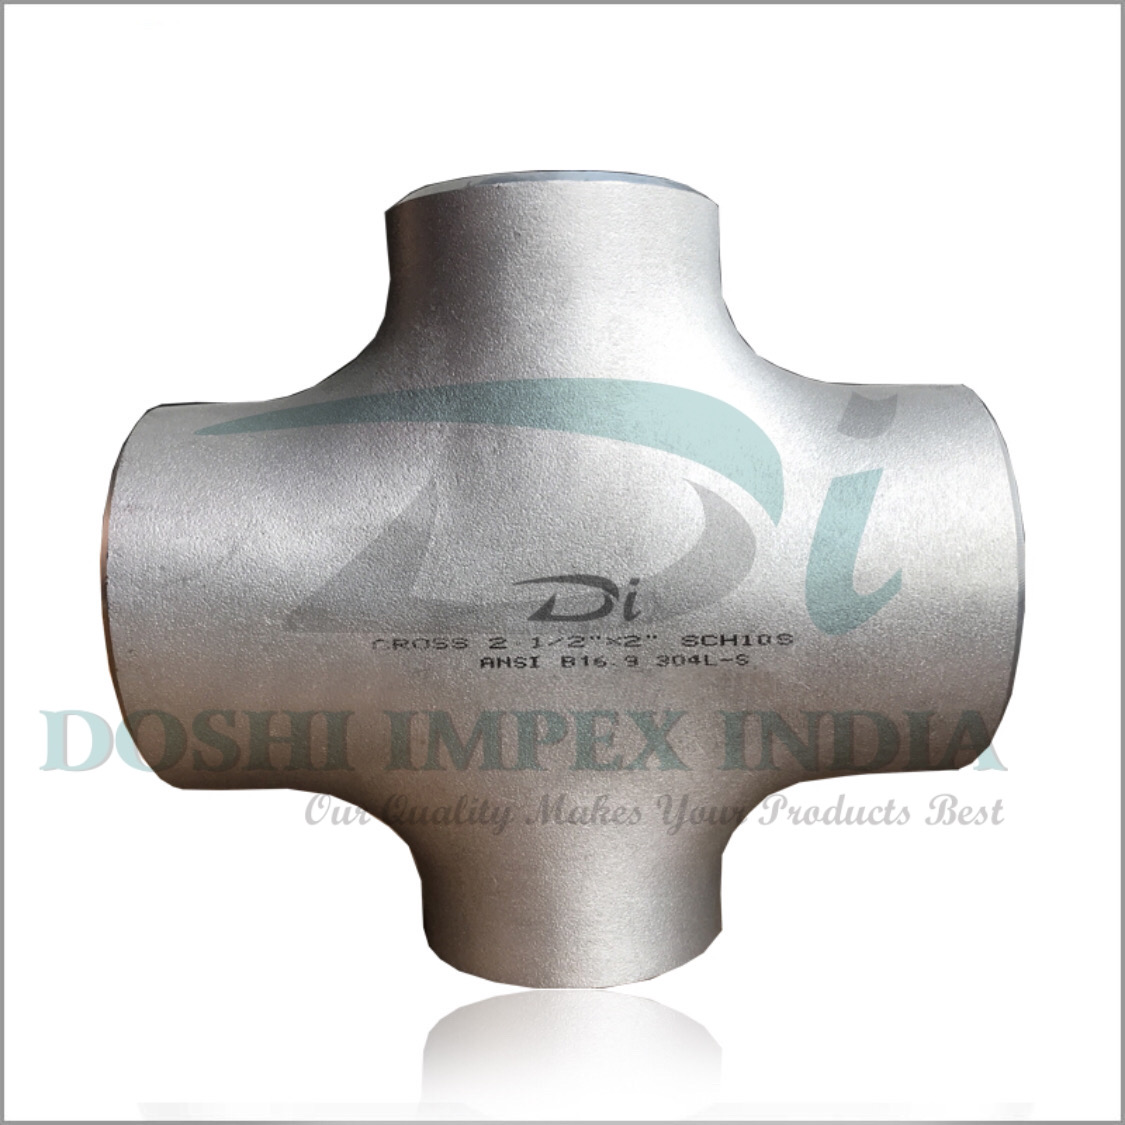 Pipe Fittings Cross Tee Manufacturer in India